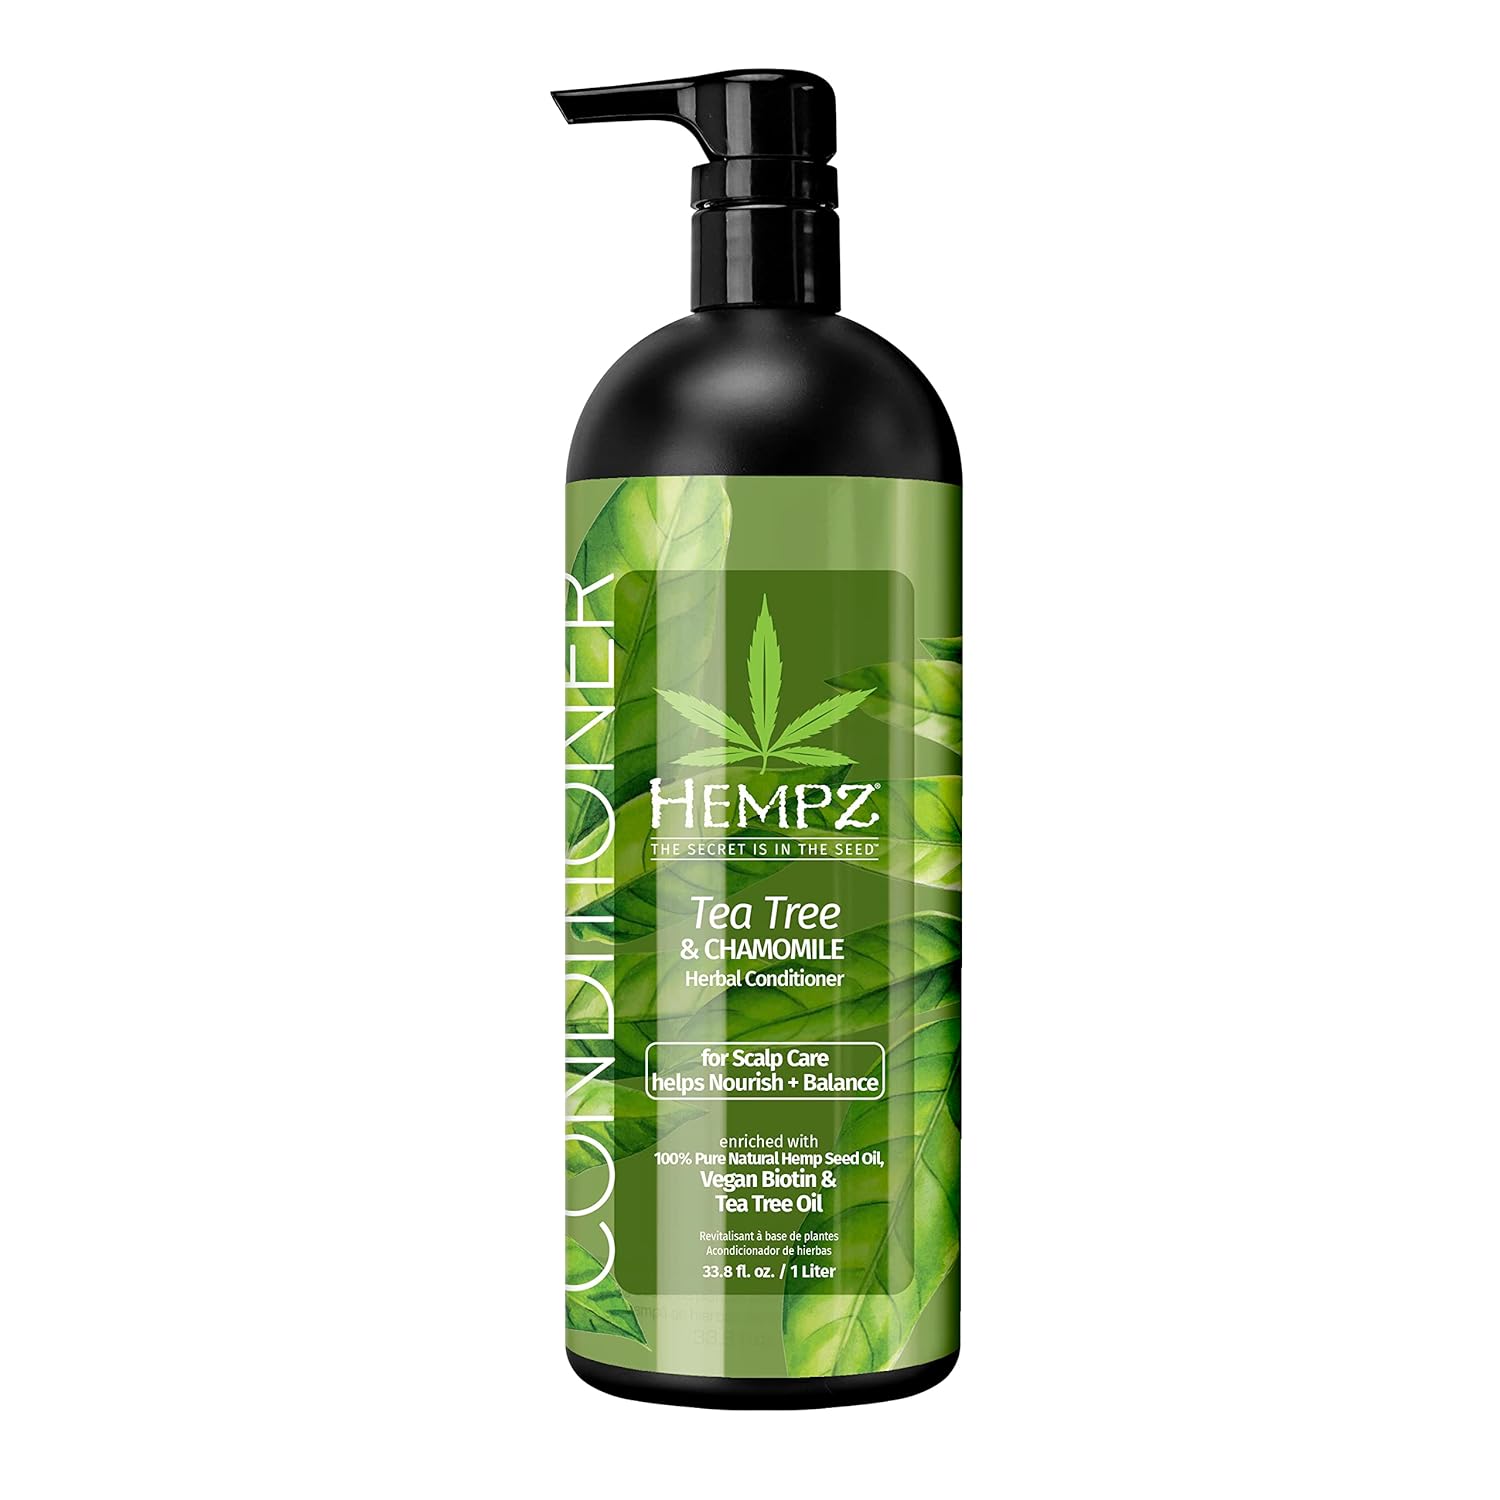 Hempz Biotin Hair Conditioner - Tea Tree & Chamomile - For Scalp Care Hair Growth & Strengthening of Dry, Damaged and Color Treated Hair, Hydrating, Softening, Moisturizing - 33.8